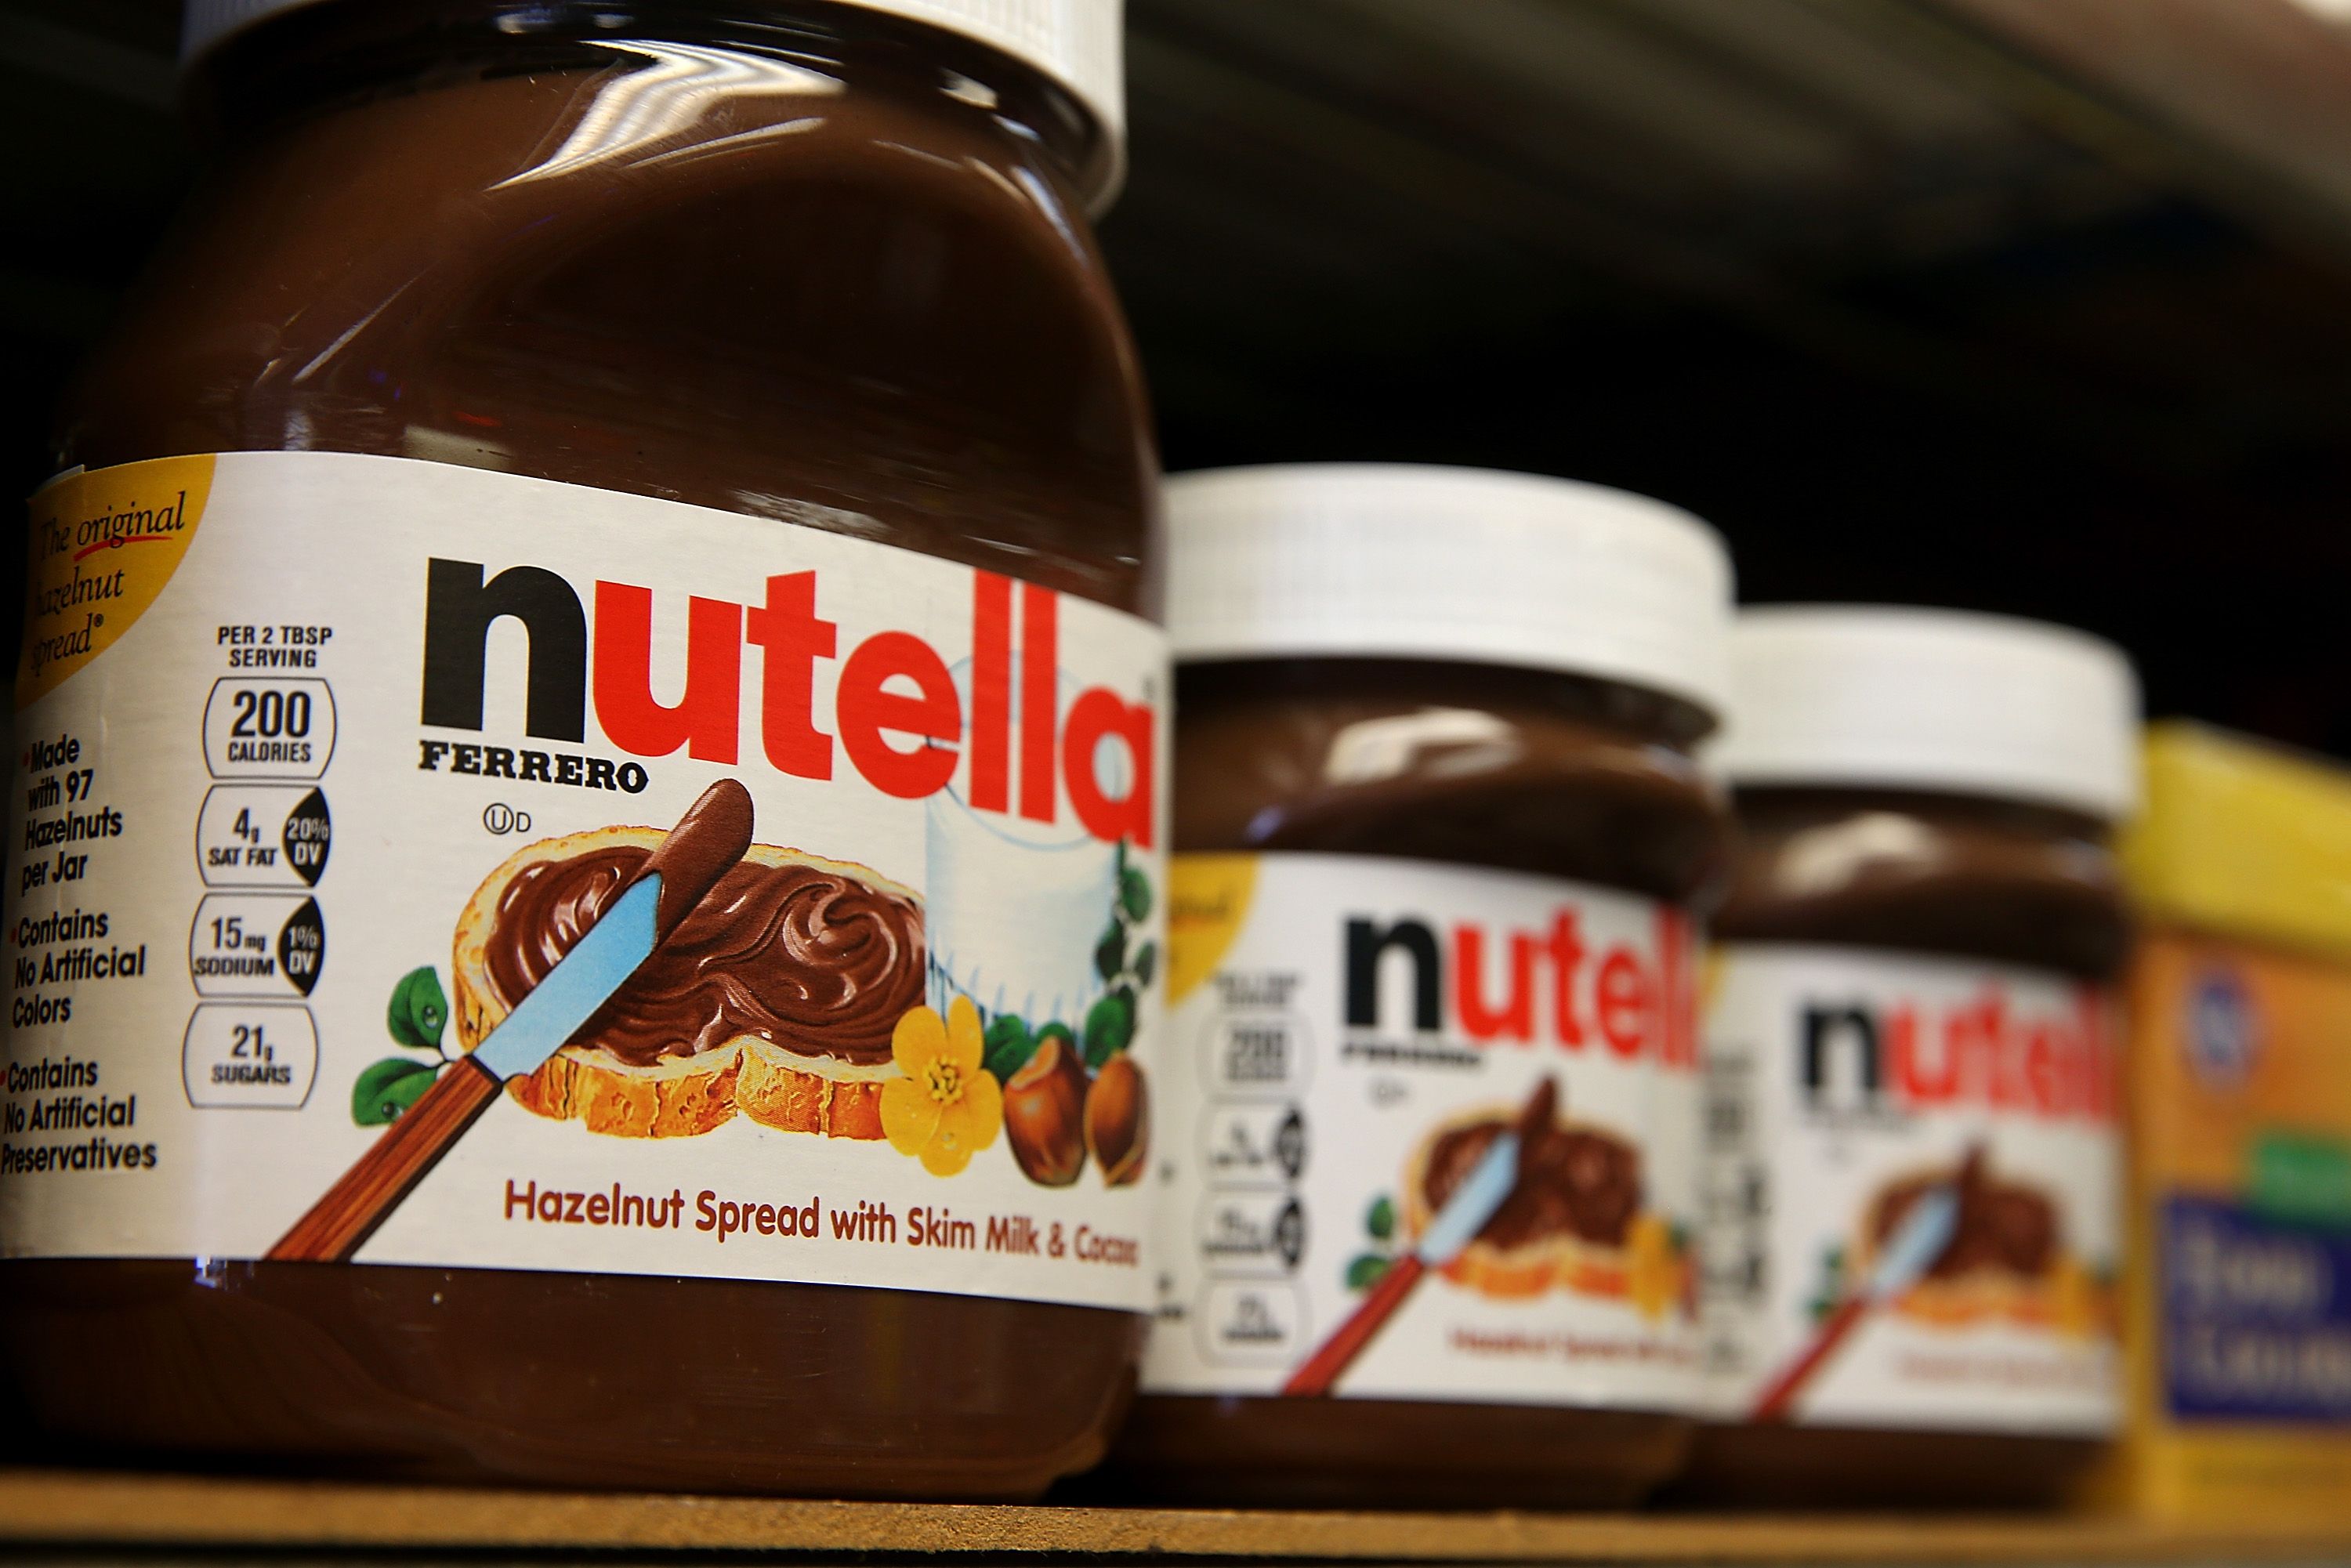 SAN FRANCISCO, CA - AUGUST 18: Jars of Nutella are displayed on a shelf at a market on August 18, 2014 in San Francisco, California. The threat of a Nutella shortage is looming after a March frost in Turkey destroyed nearly 70 percent of the hazelnut crops, the main ingredient in the popular chocolate spread. Turkey is the largest producer of hazelnuts in the world. (Photo by Justin Sullivan/Getty Images)